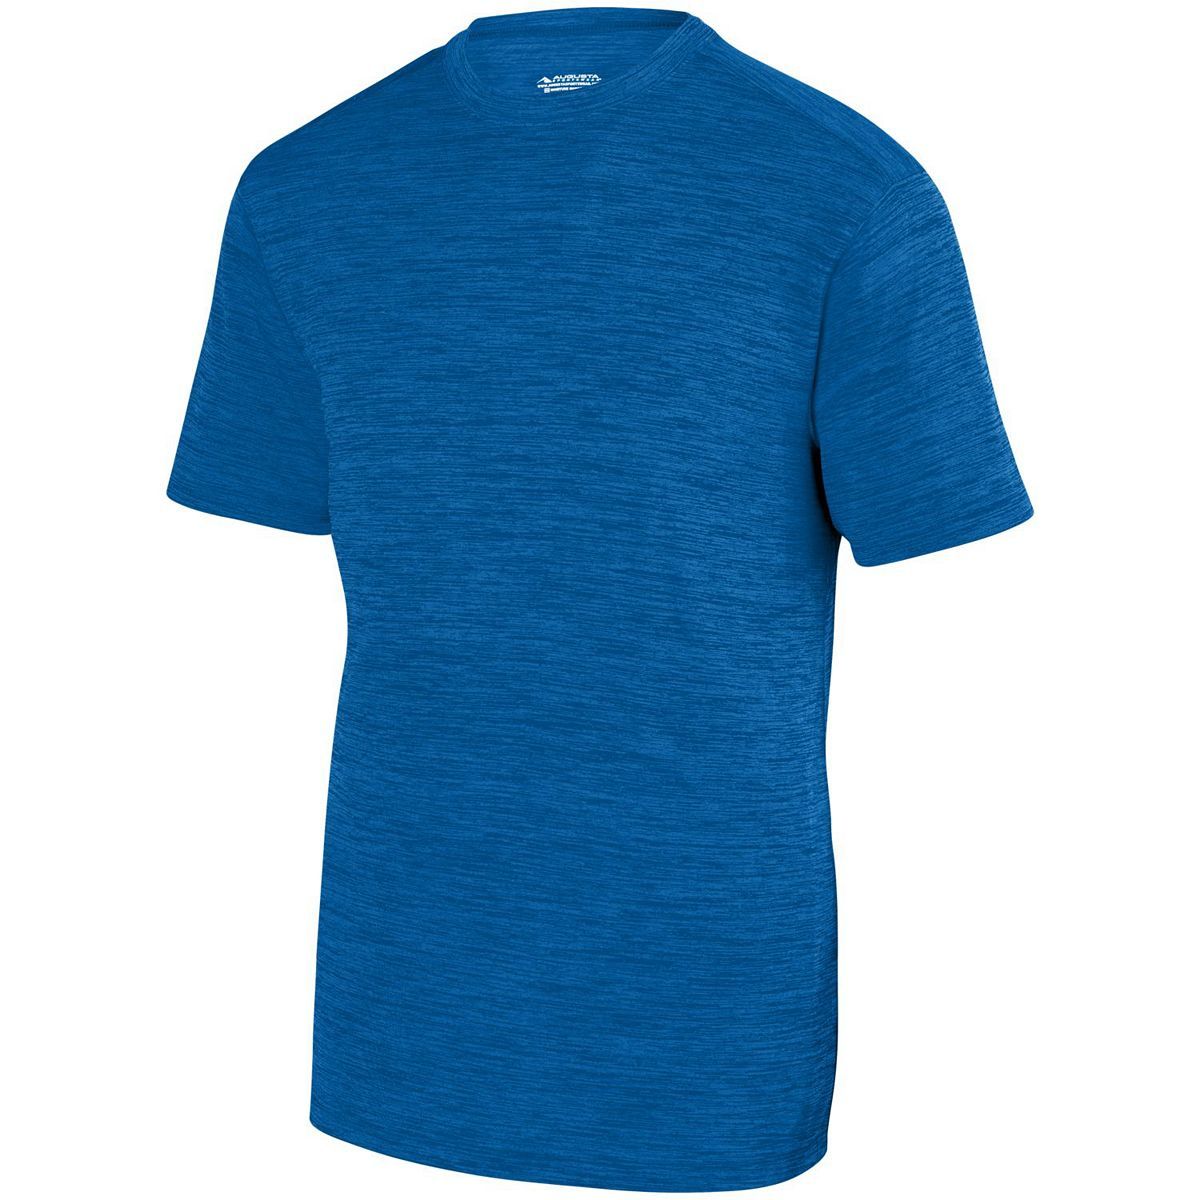 Augusta Sportswear Shadow Tonal Heather Training Tee in Royal  -Part of the Adult, Adult-Tee-Shirt, T-Shirts, Augusta-Products, Shirts, Tonal-Fleece-Collection product lines at KanaleyCreations.com